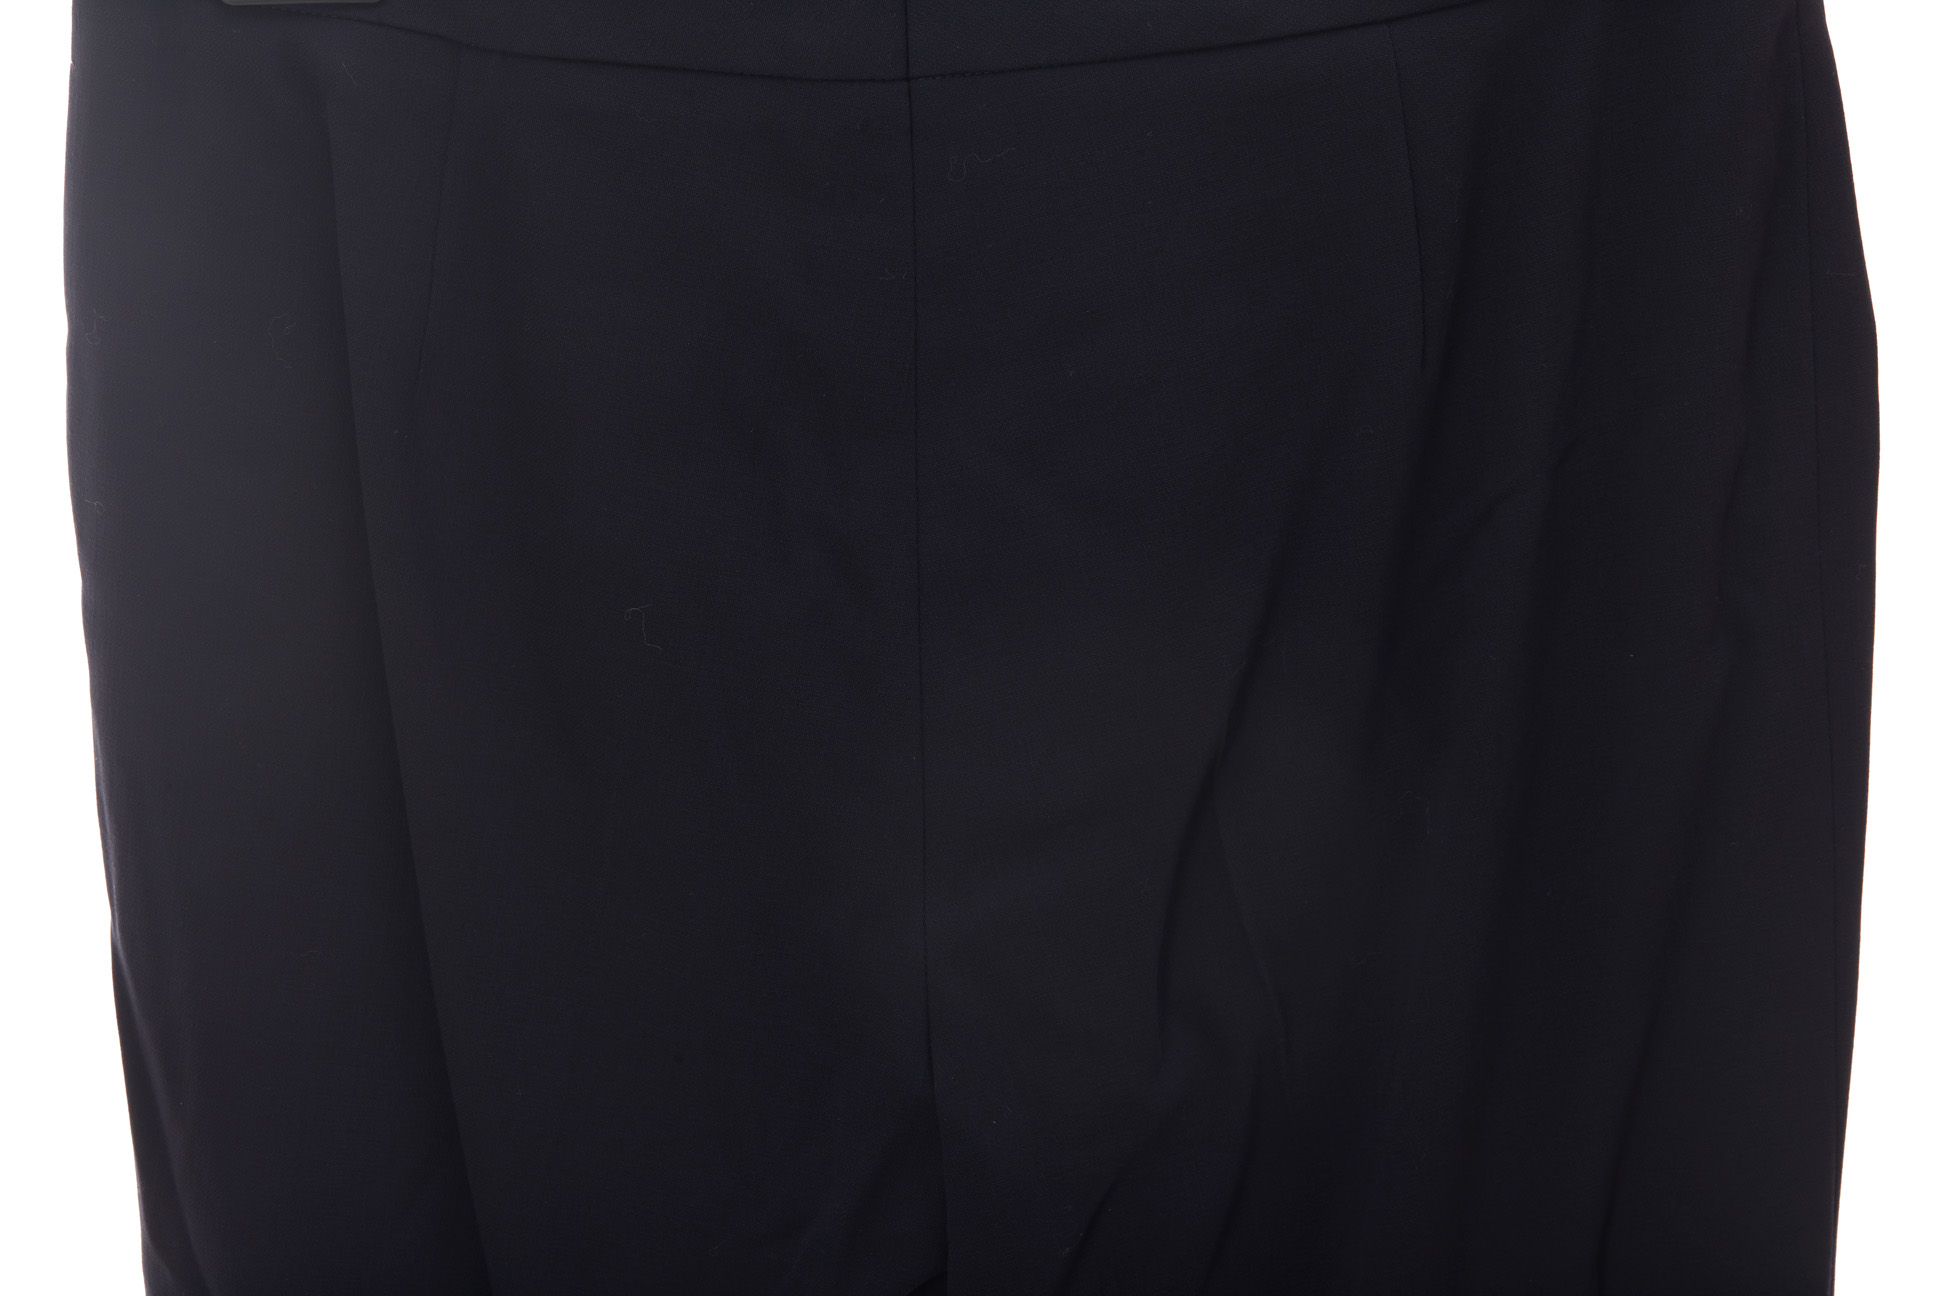 A PAIR OF ESCADA 'TOVAH' WOOL TROUSERS - Image 2 of 3